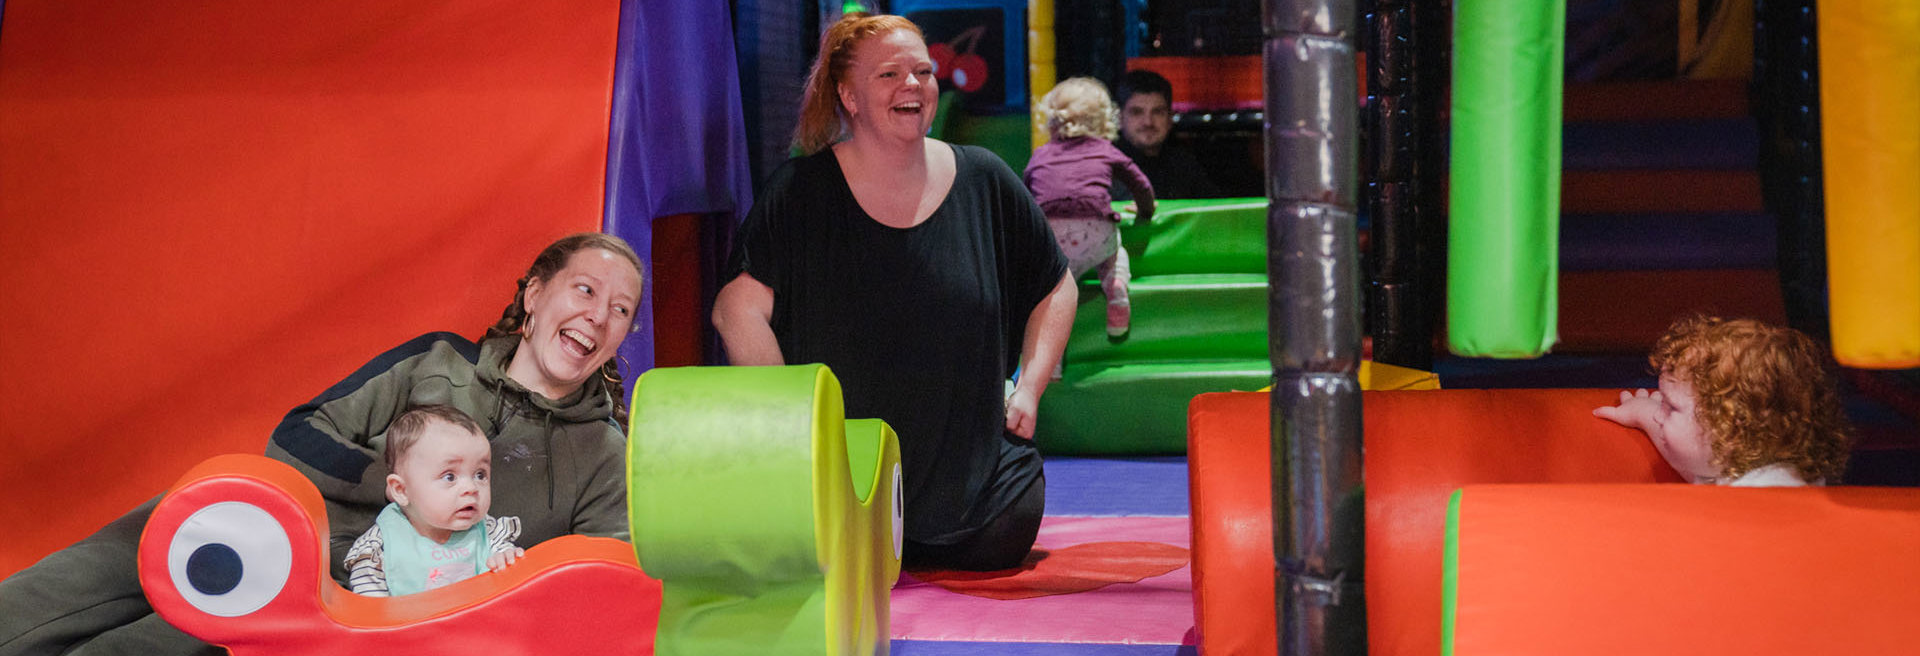 Parents and toddlers playing in soft play at namco funscape